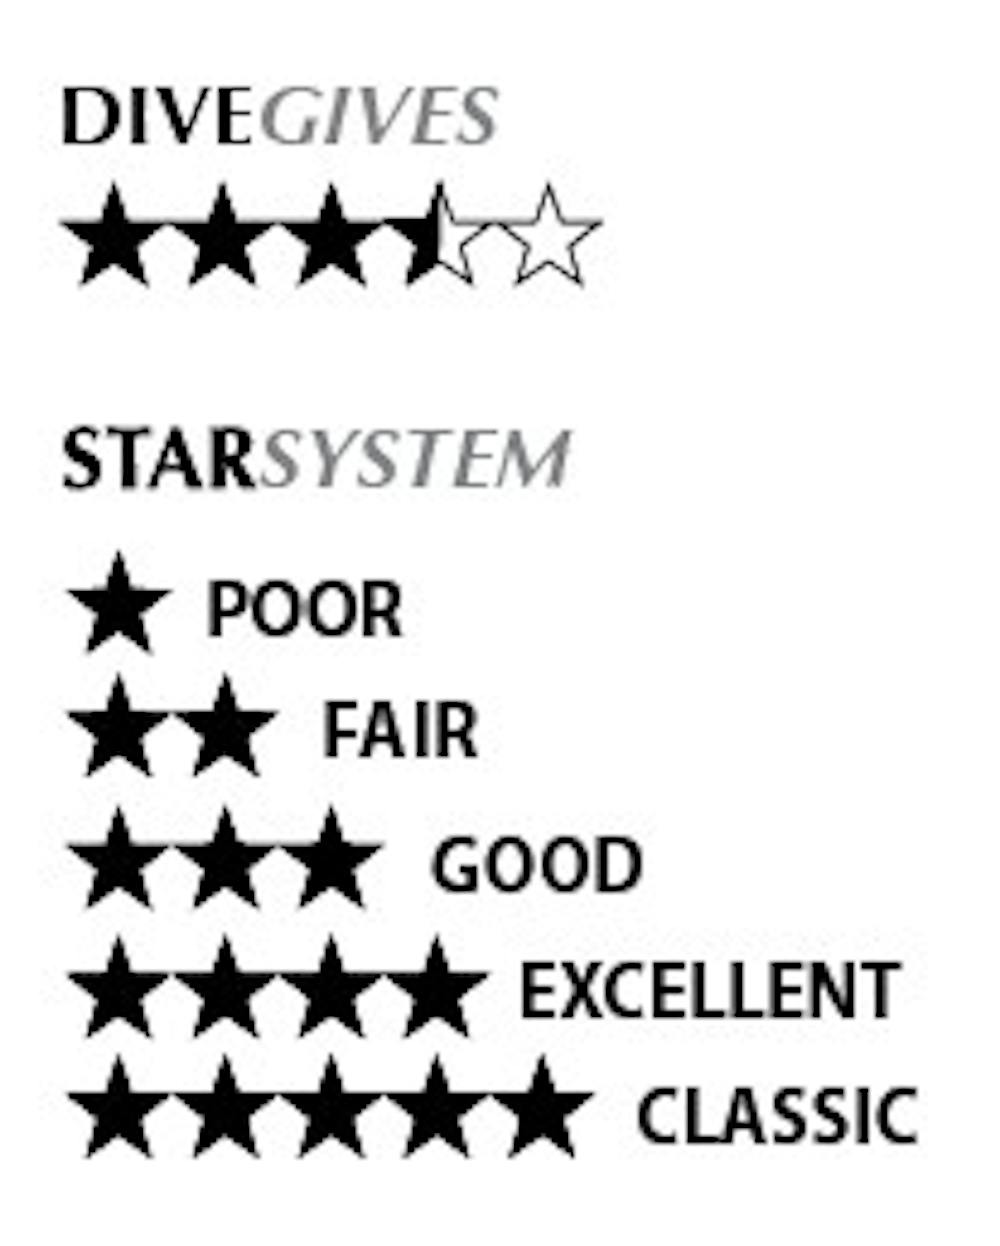 Dive gives 3.5 of 5 stars